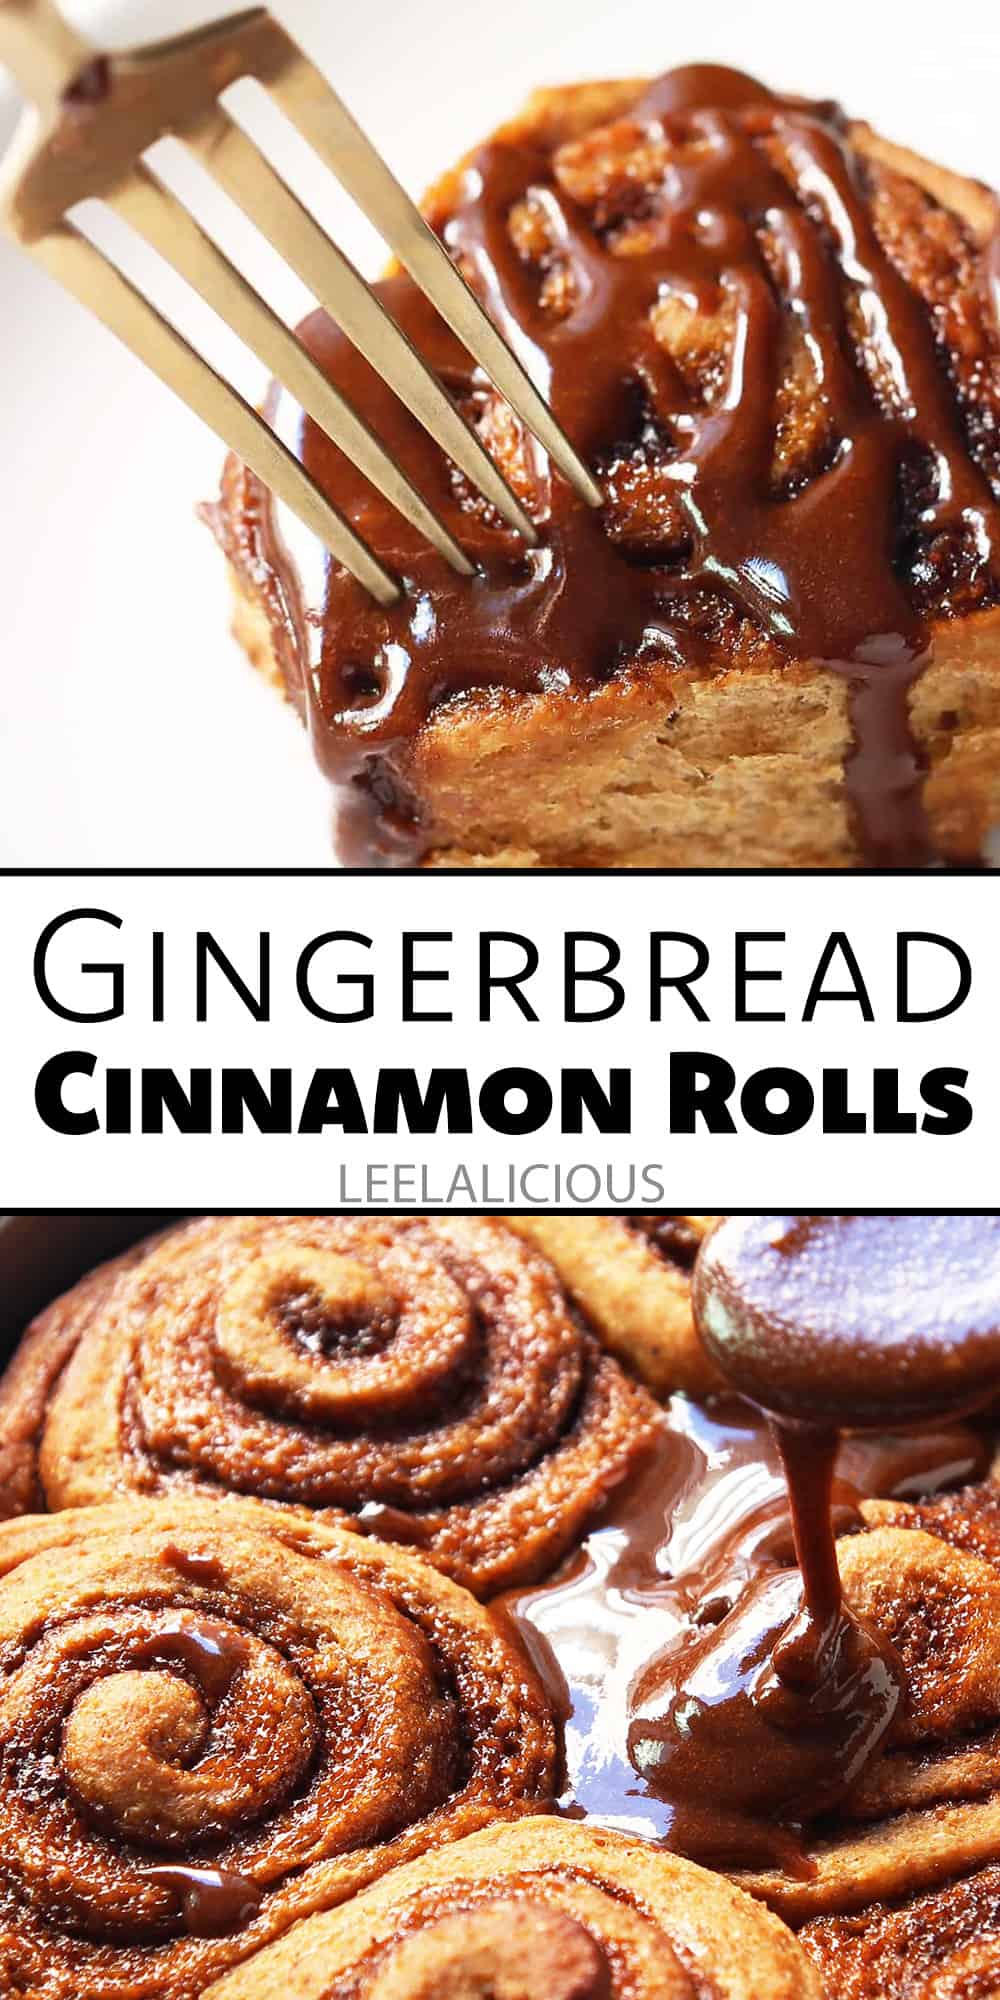 Whole Wheat Gingerbread Cinnamon Rolls make for a cozy Christmas breakfast treat. Molasses and an aromatic spice mix give these sweet rolls their unmistakable gingerbread flavor. This recipe is made with whole wheat flour and refined sugar free.